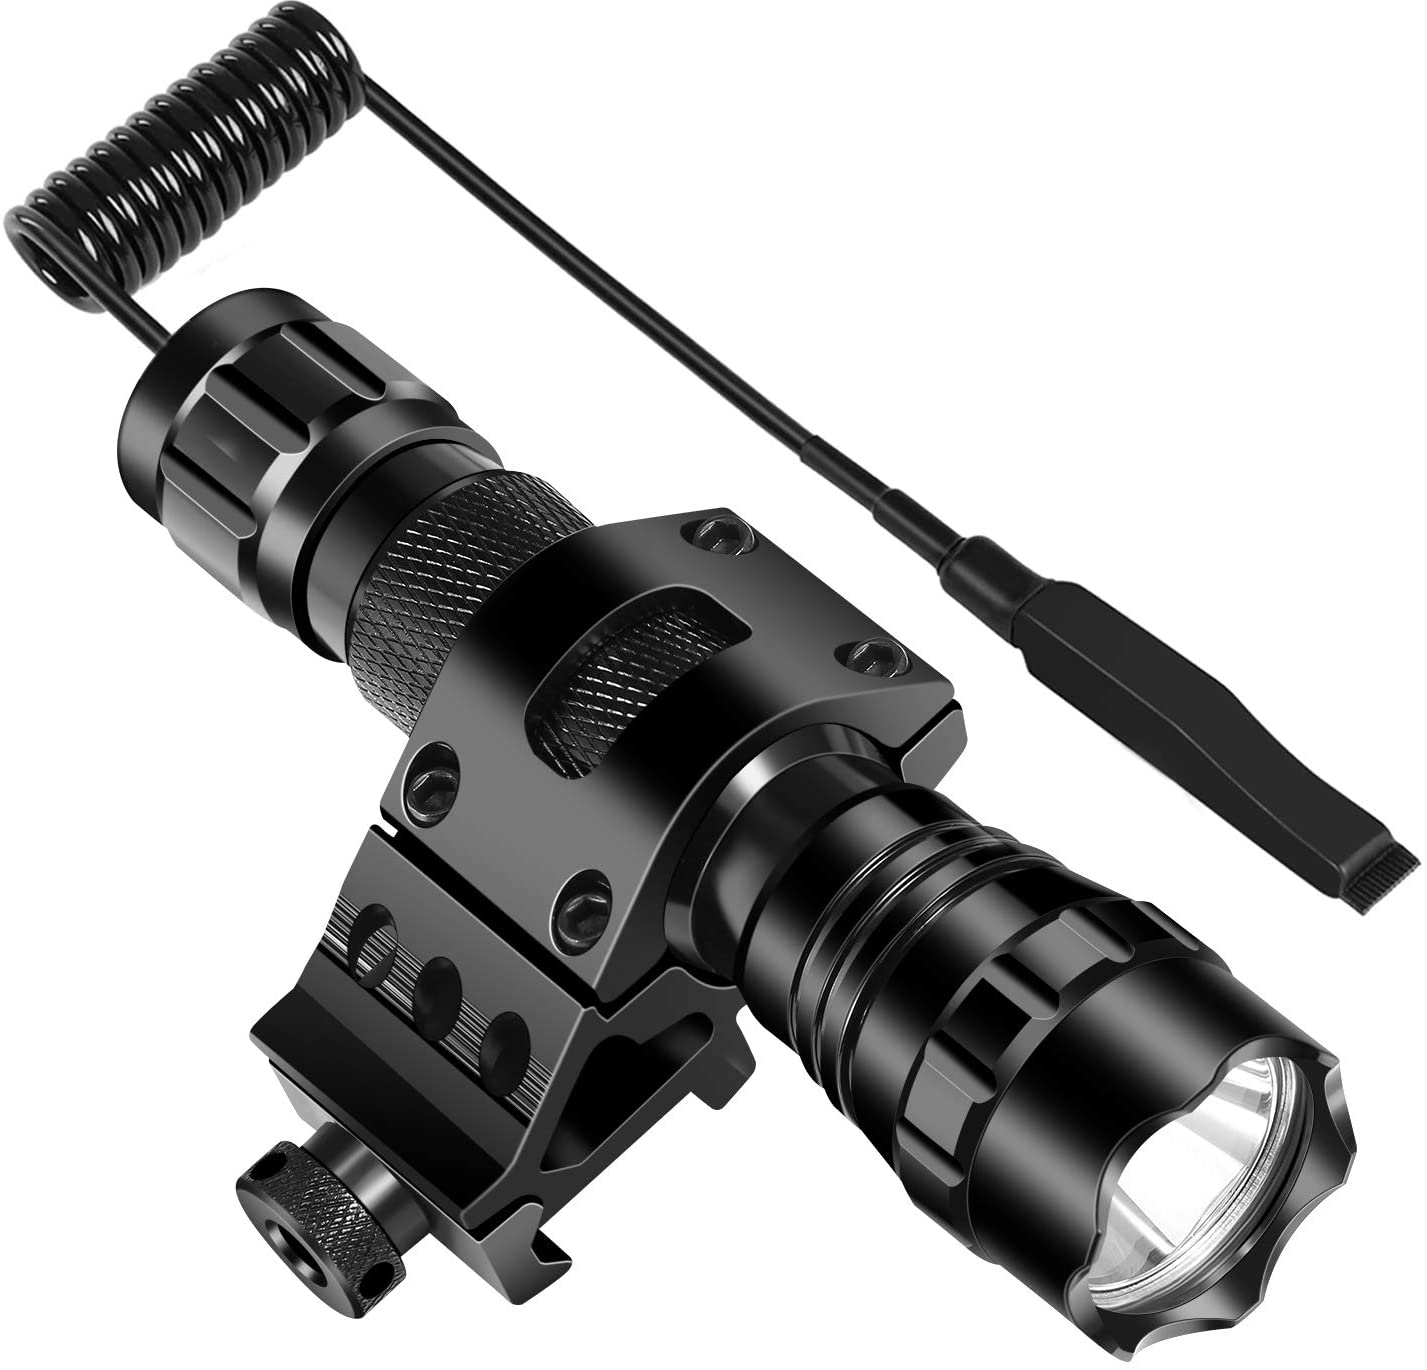 CCKO rechargeable tactical light